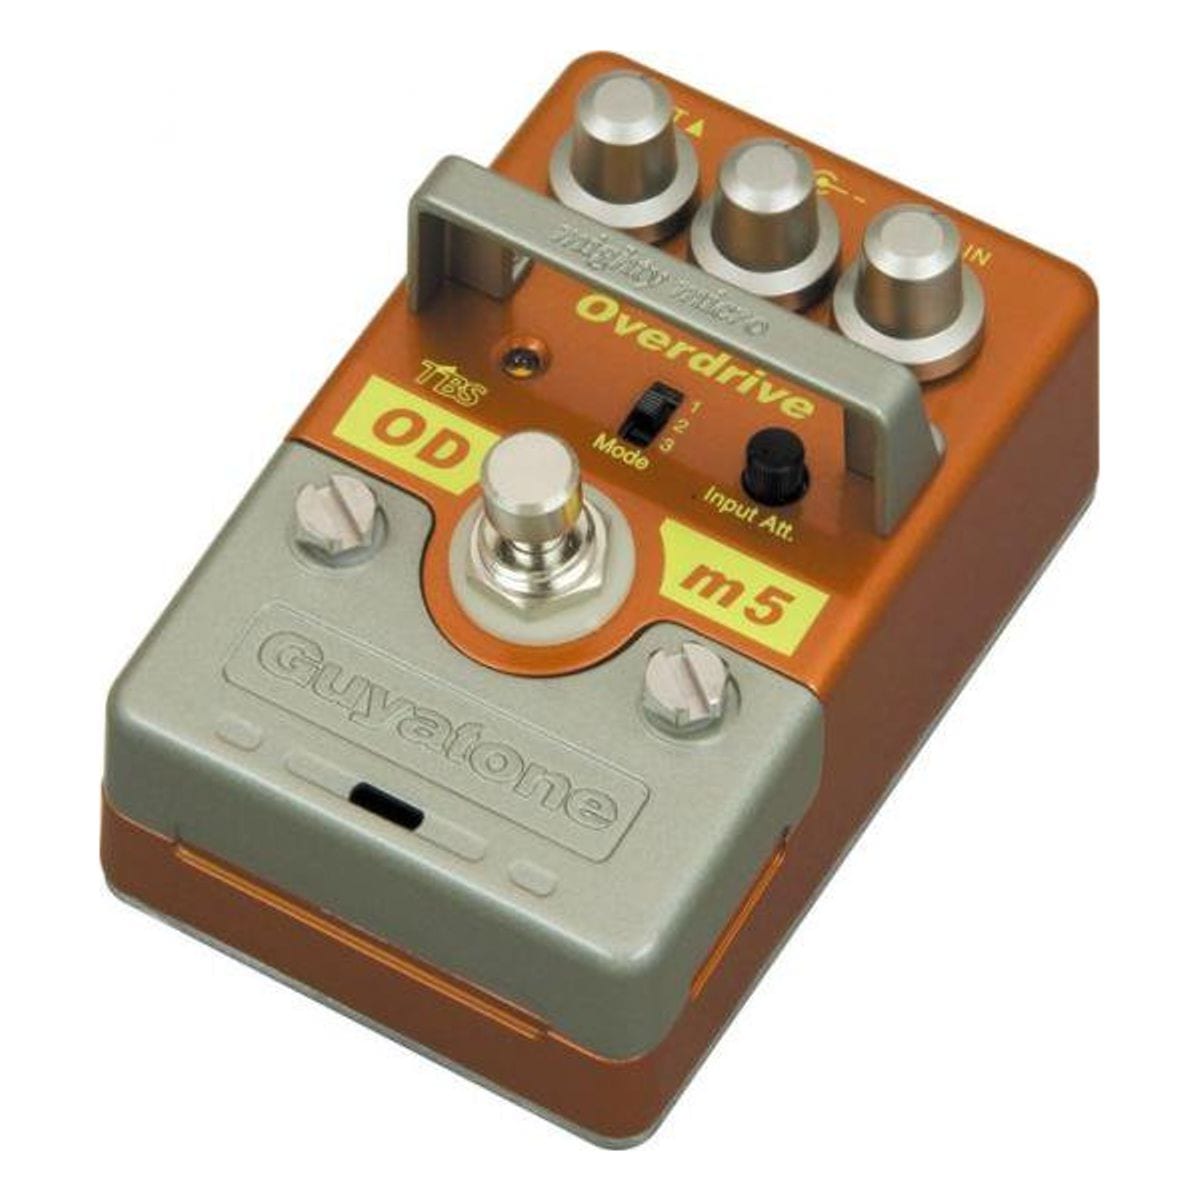 Guyatone ODm5 Overdrive Guitar Effects Pedal – Bonners Music